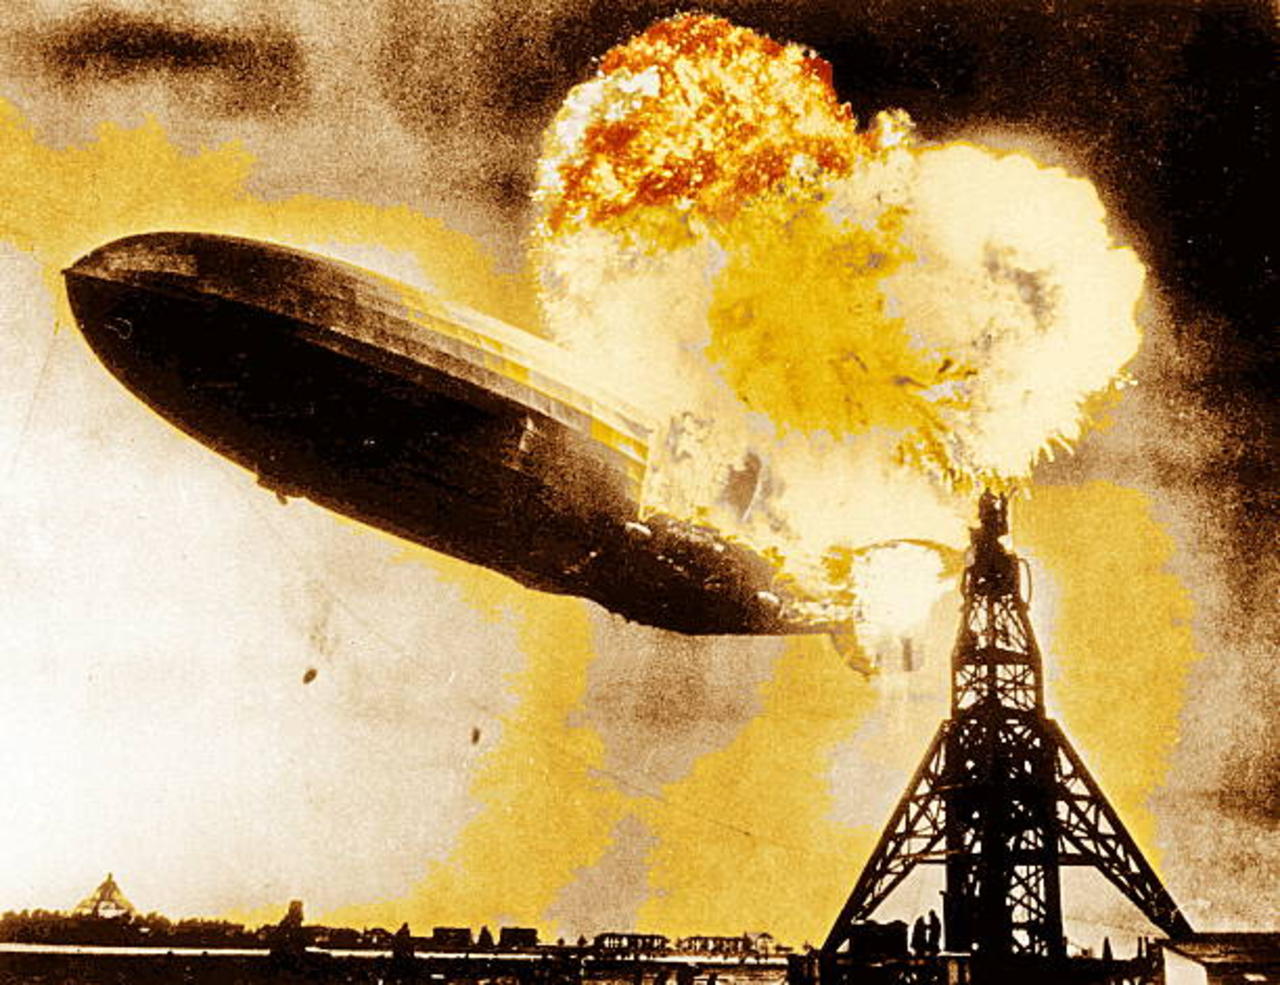 This Day in History: The Hindenburg Disaster